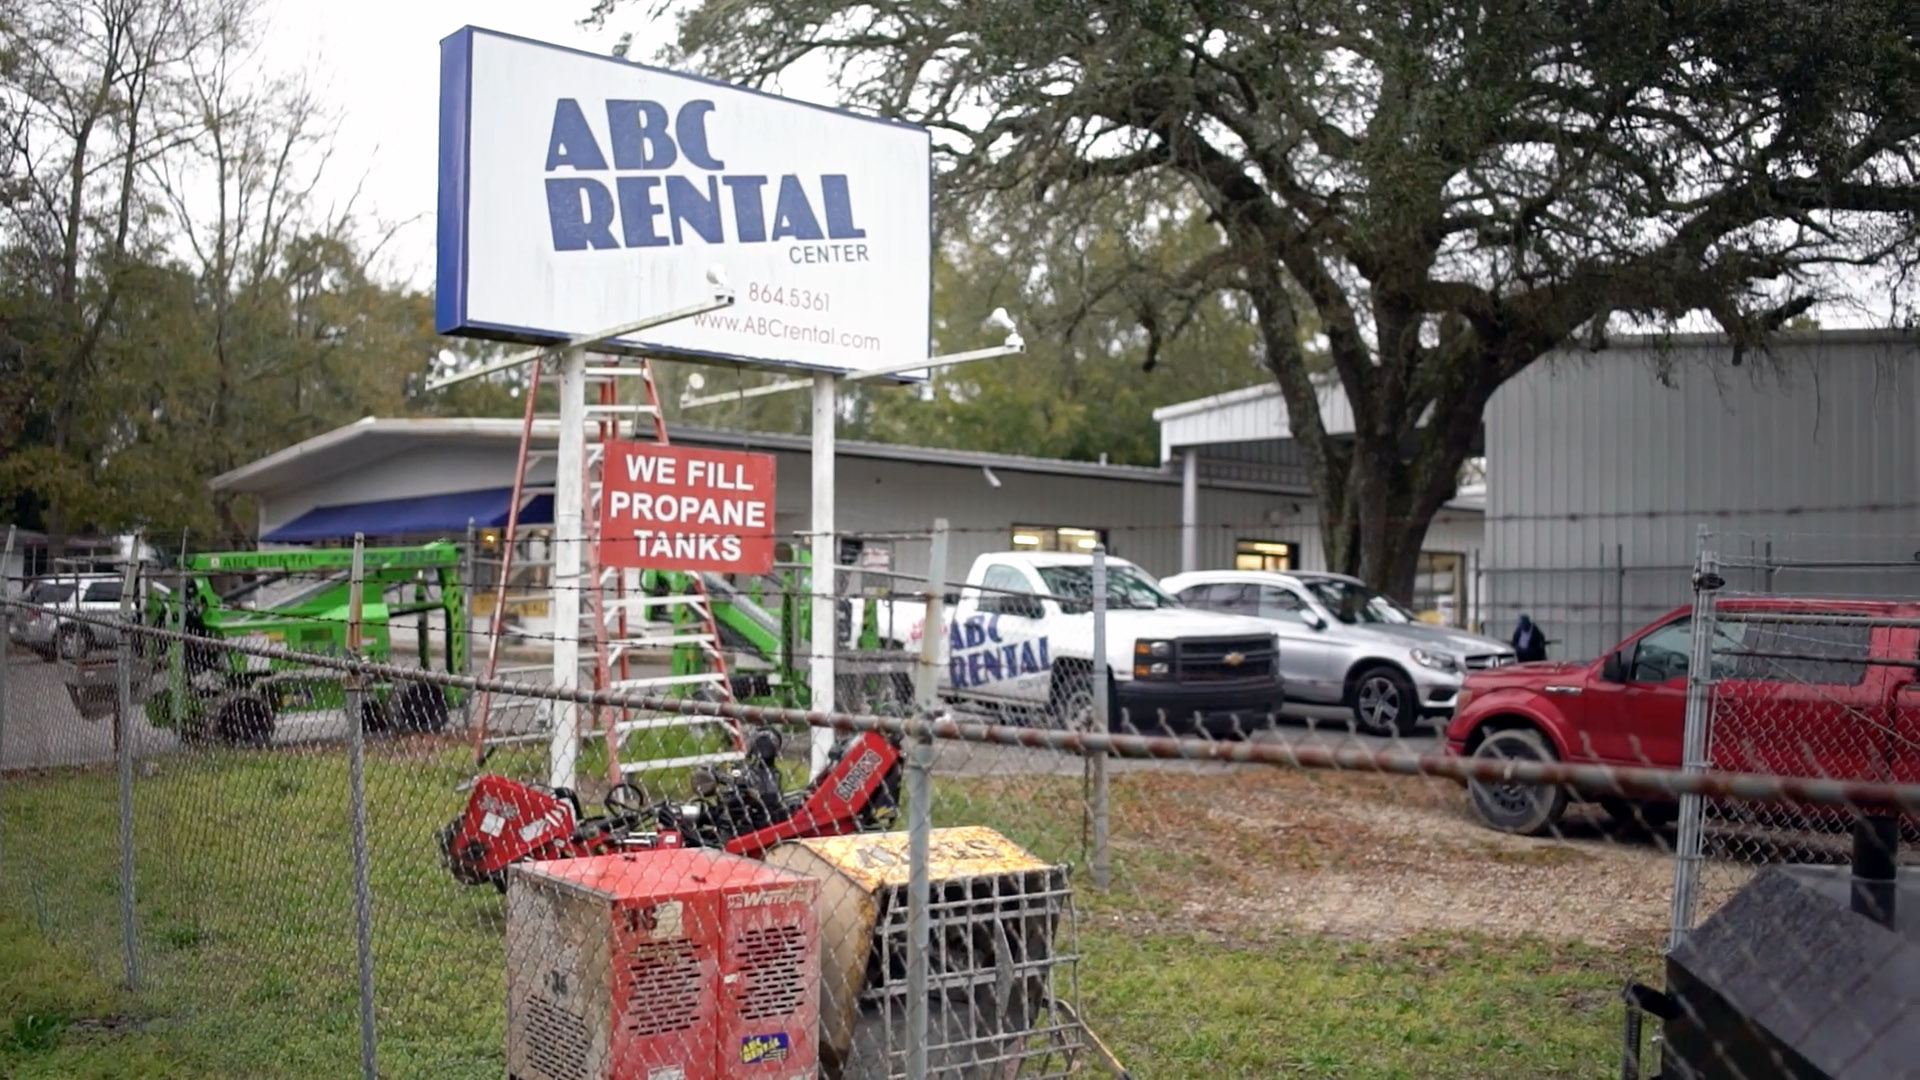 ABC Rental in Gulfport, Miss. is owned by David Delk.